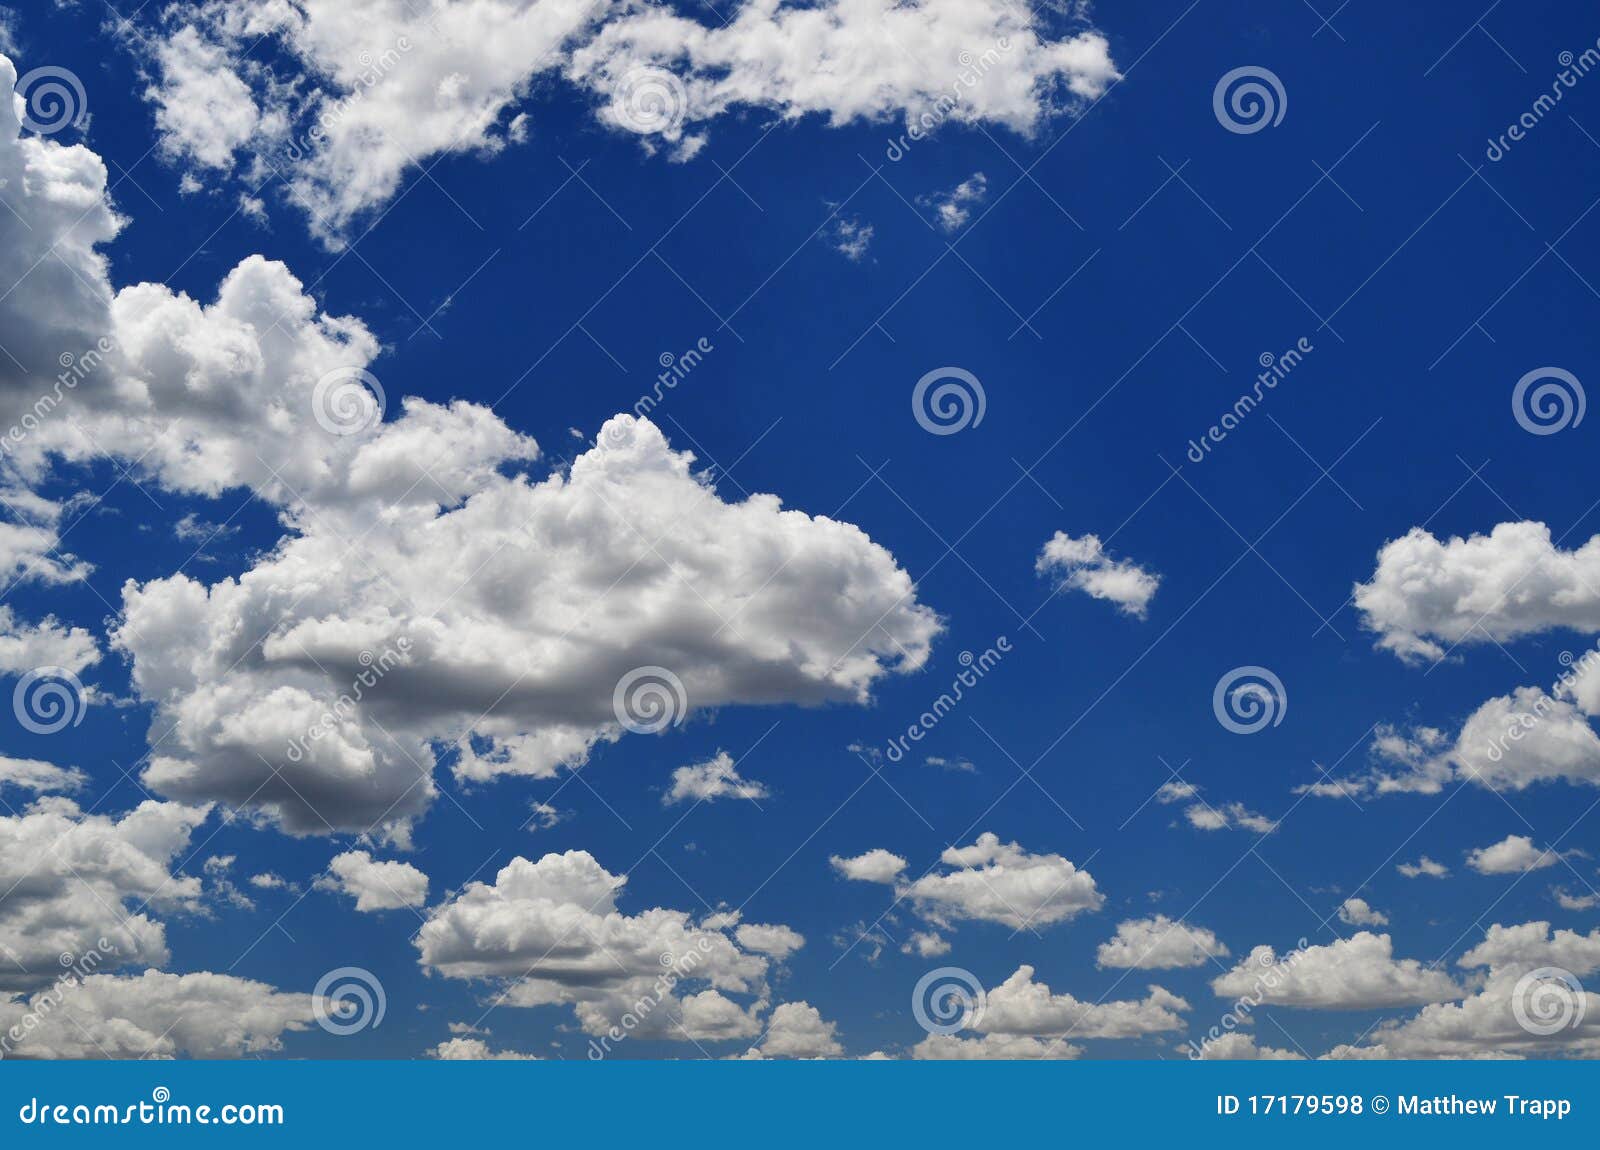  - white-fluffy-clouds-blue-sky-17179598